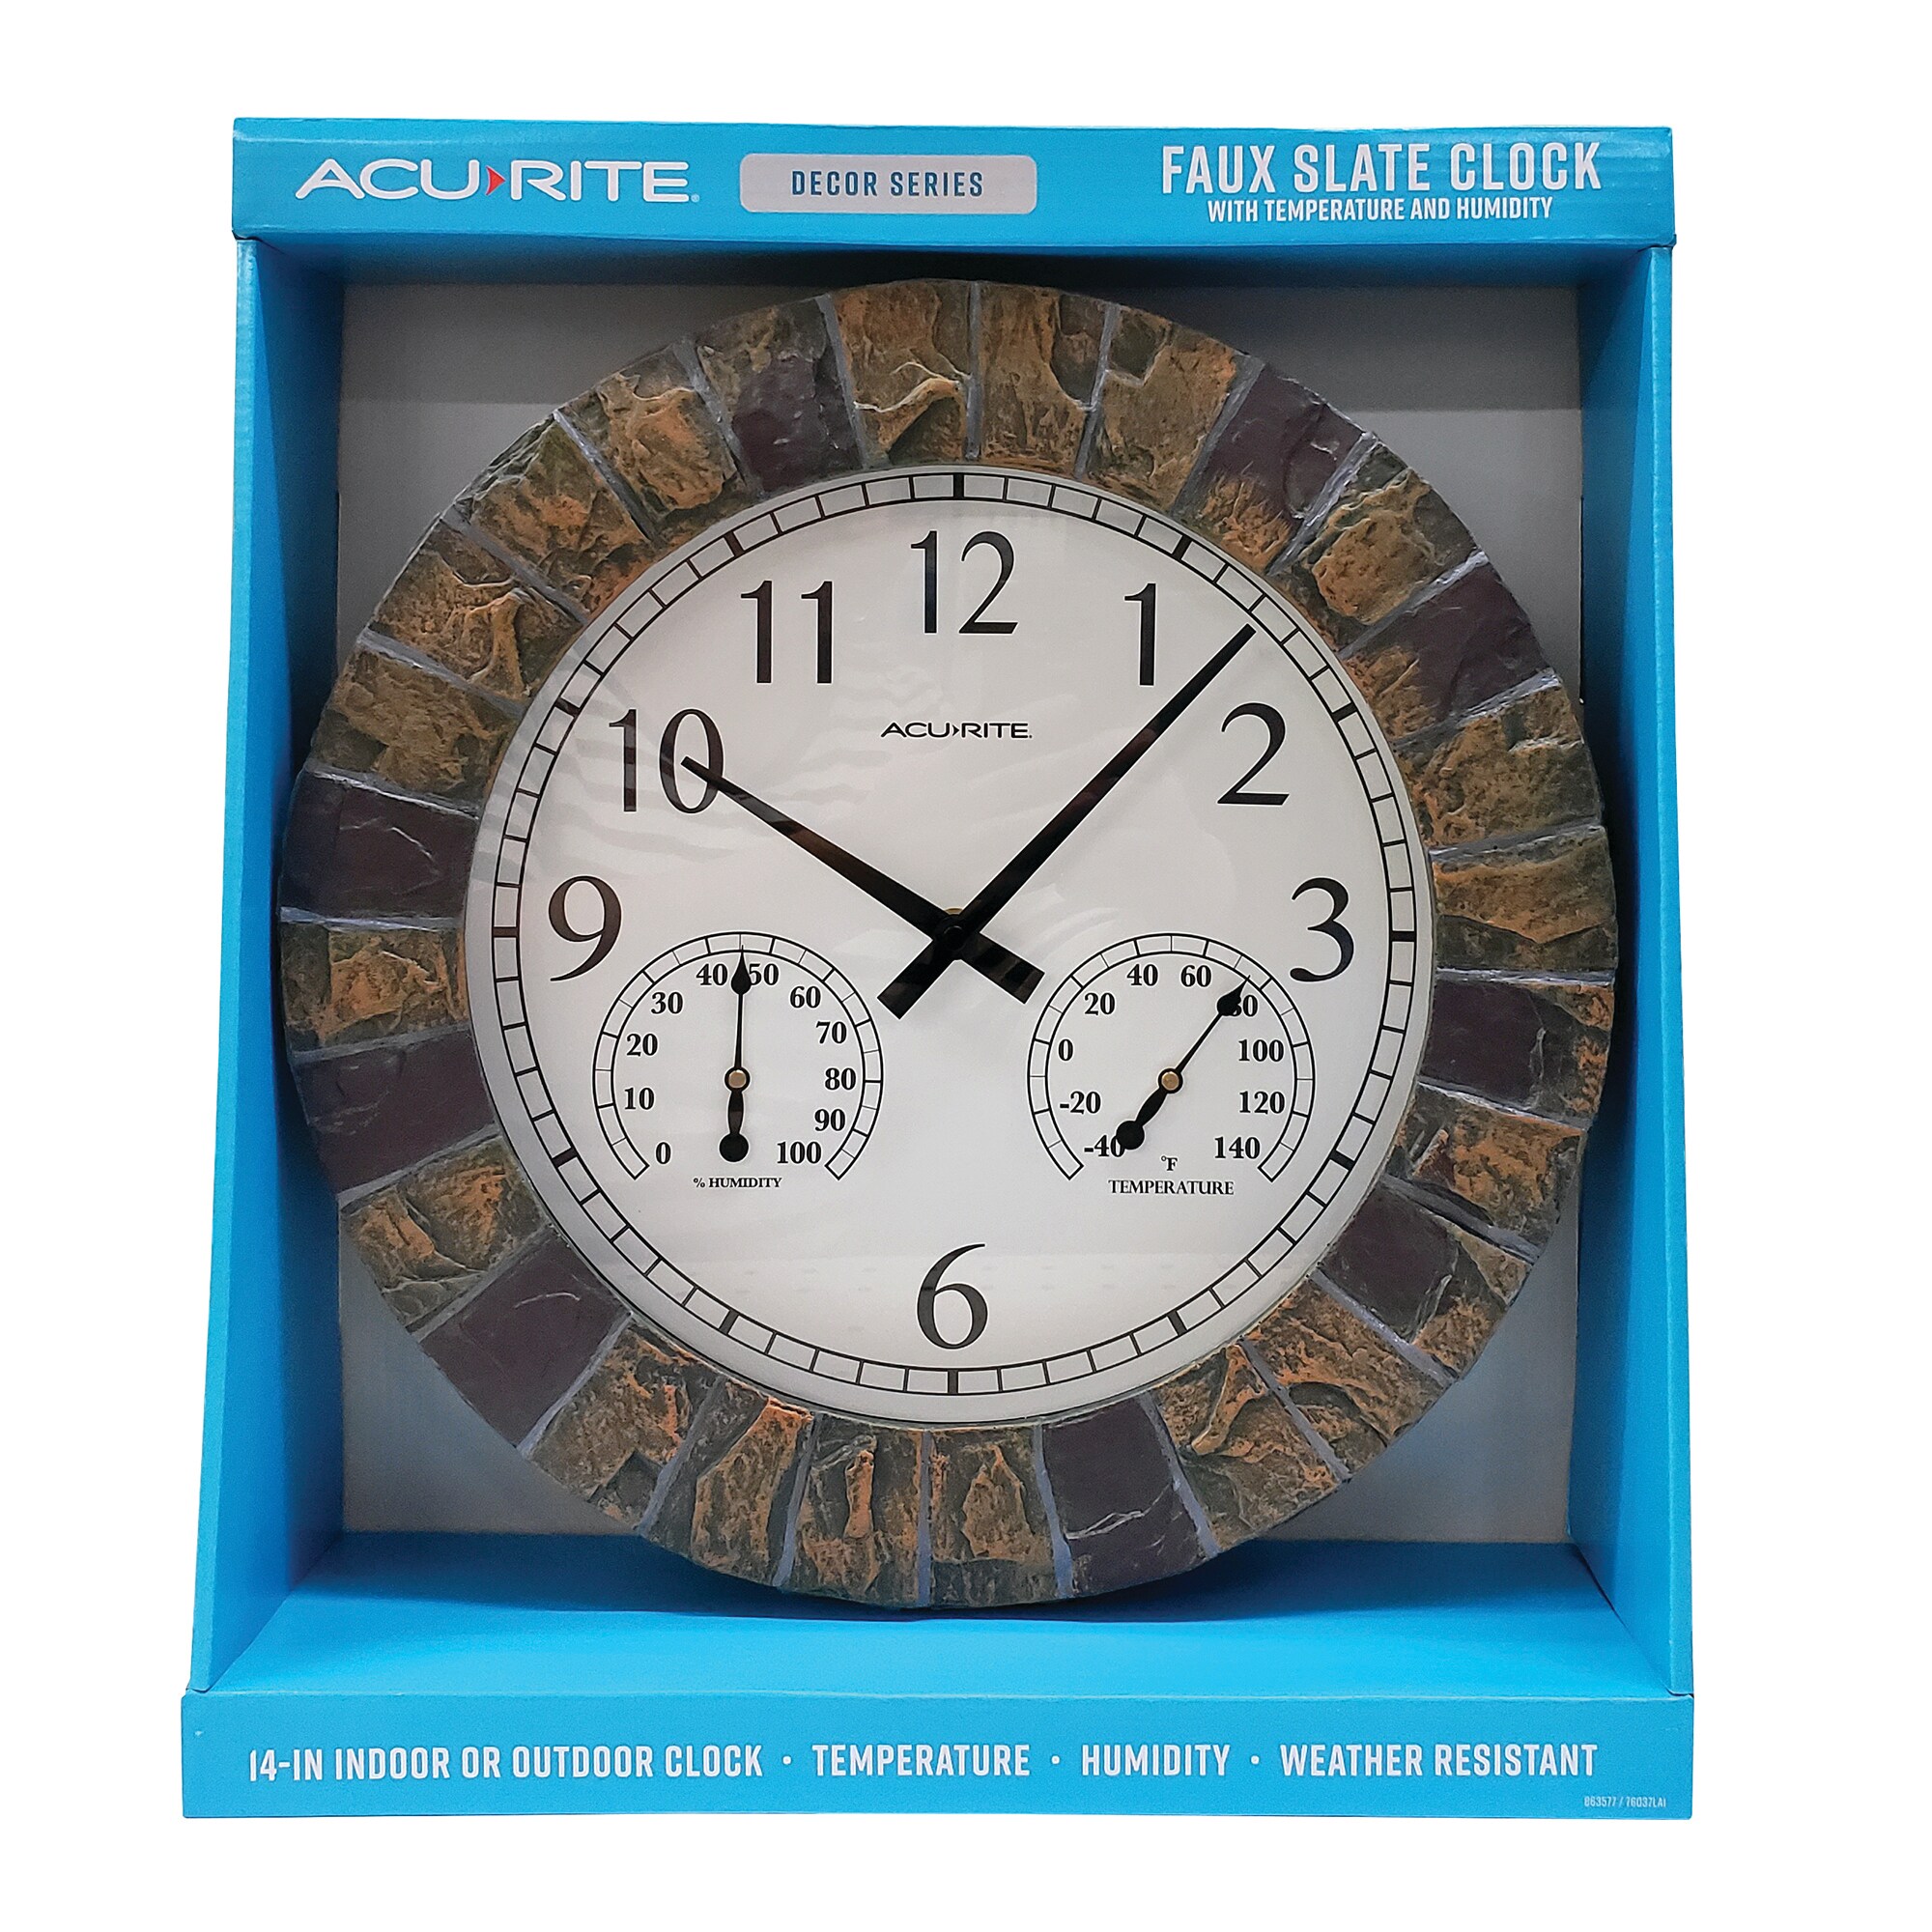 NEW AcuRite 14-inch Faux Slate Outdoor Clock with Thermometer and Humidity 